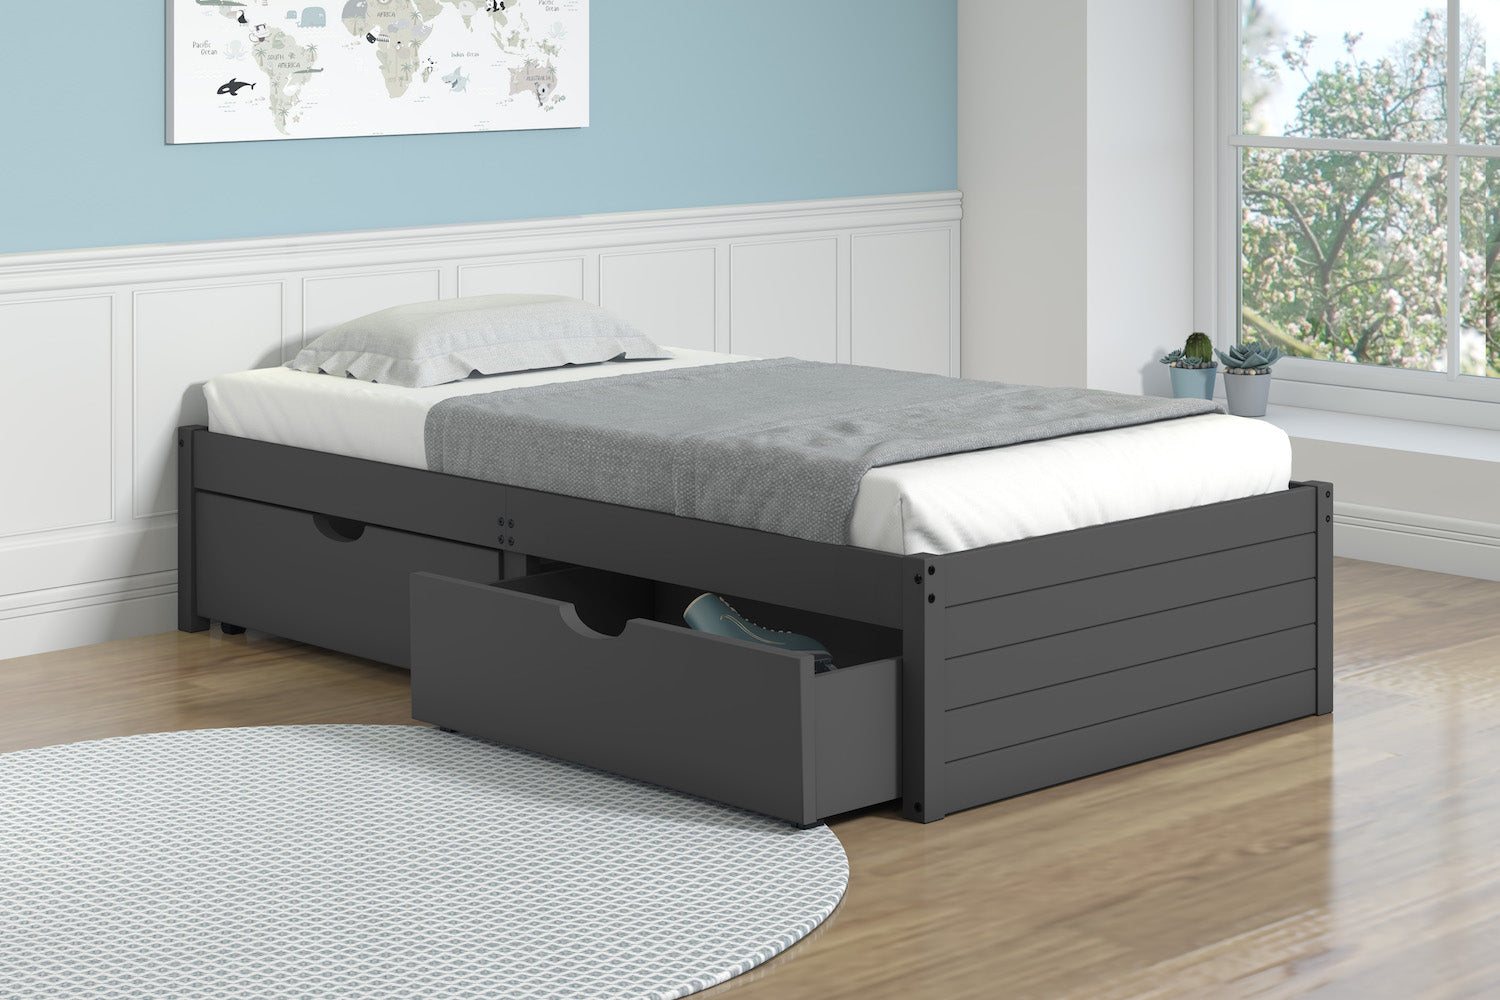 Weekly Or Monthly Dark Grey Twin Bed With Under Bed Drawers